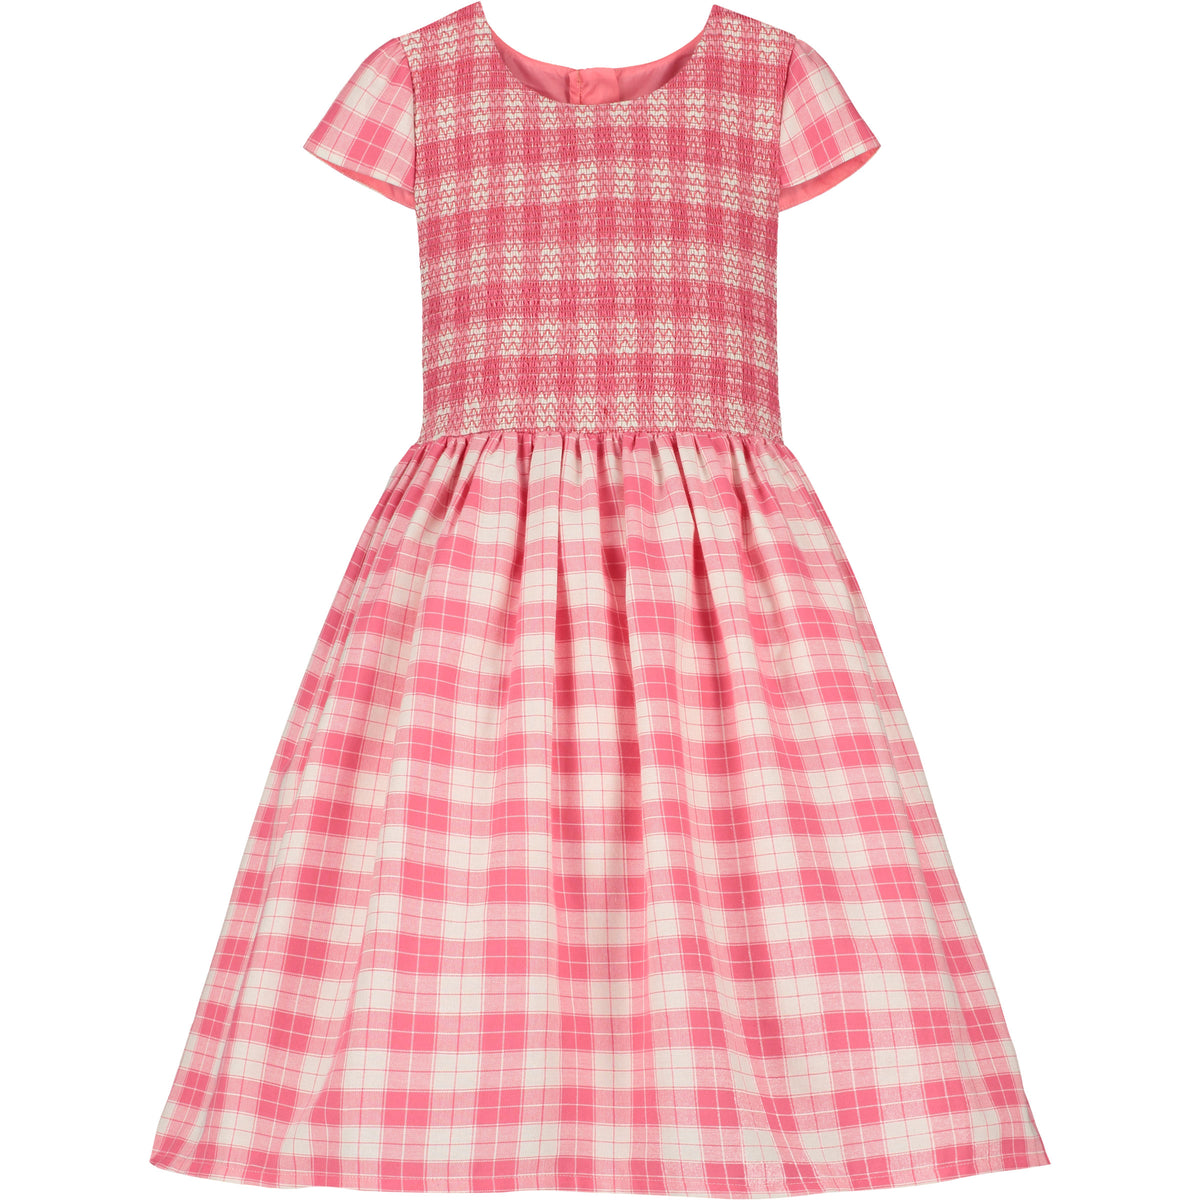 Girls Party Dress Shimmer Pink Bonnie Plaid Cotton Smocked | Holly Hastie London